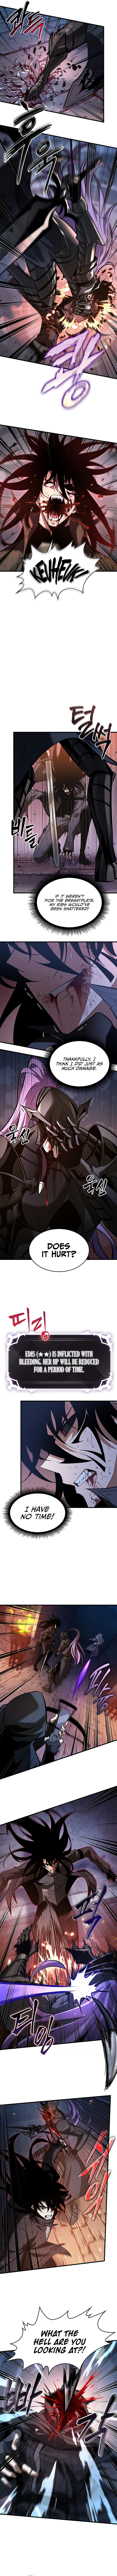 Pick Me Up Chapter 54 page 3